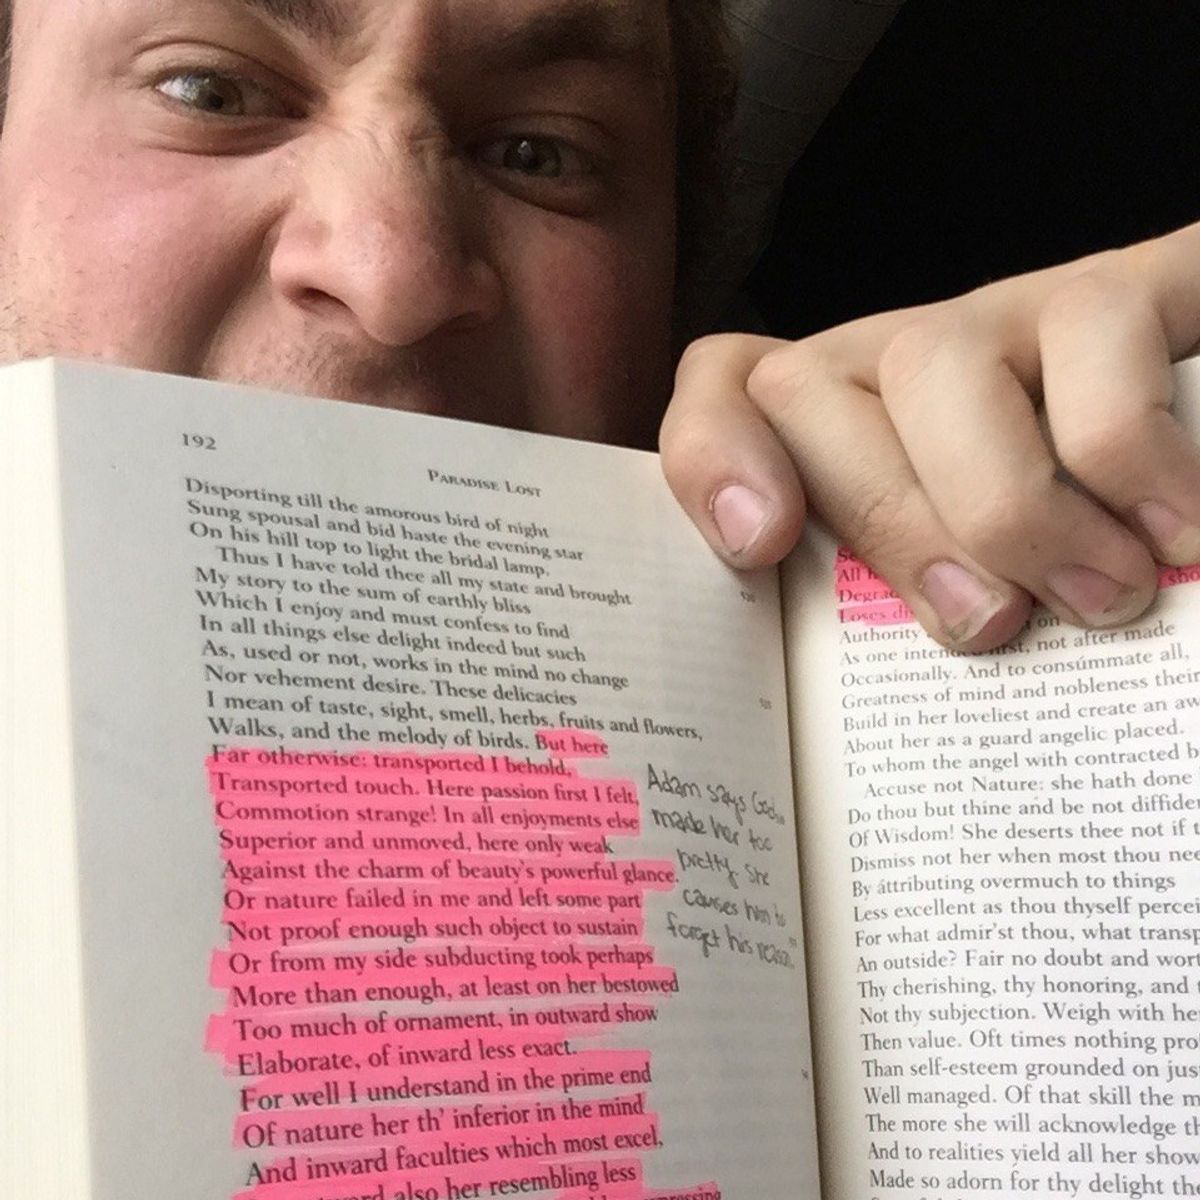 To The Previous Reader: Stop With The Highlighting!